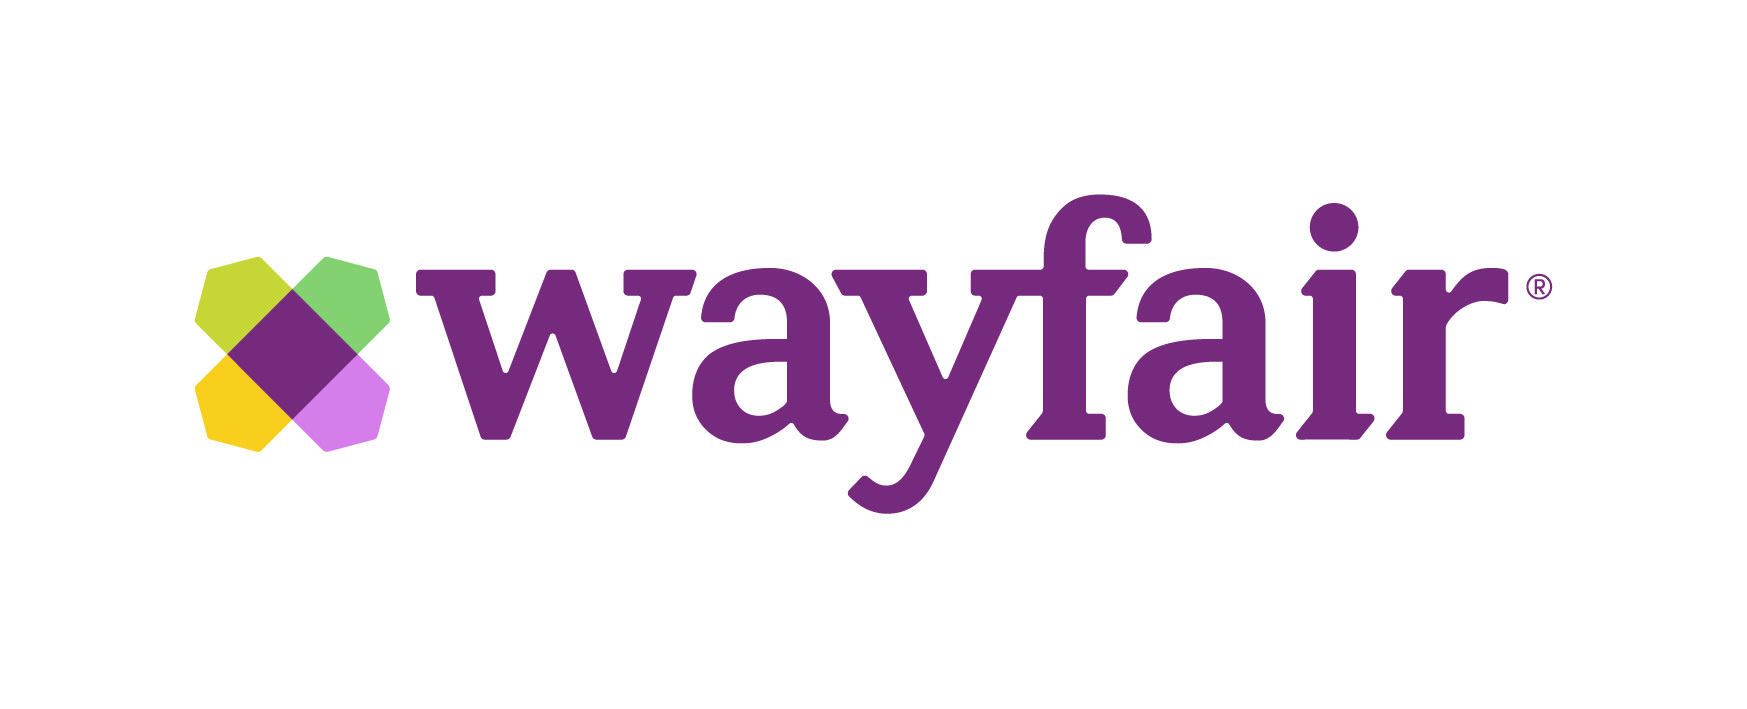 Wayfair Honors Military Veterans, Commits To Creating Accessible Homes And  Career Opportunities For The Military Community | Business Wire